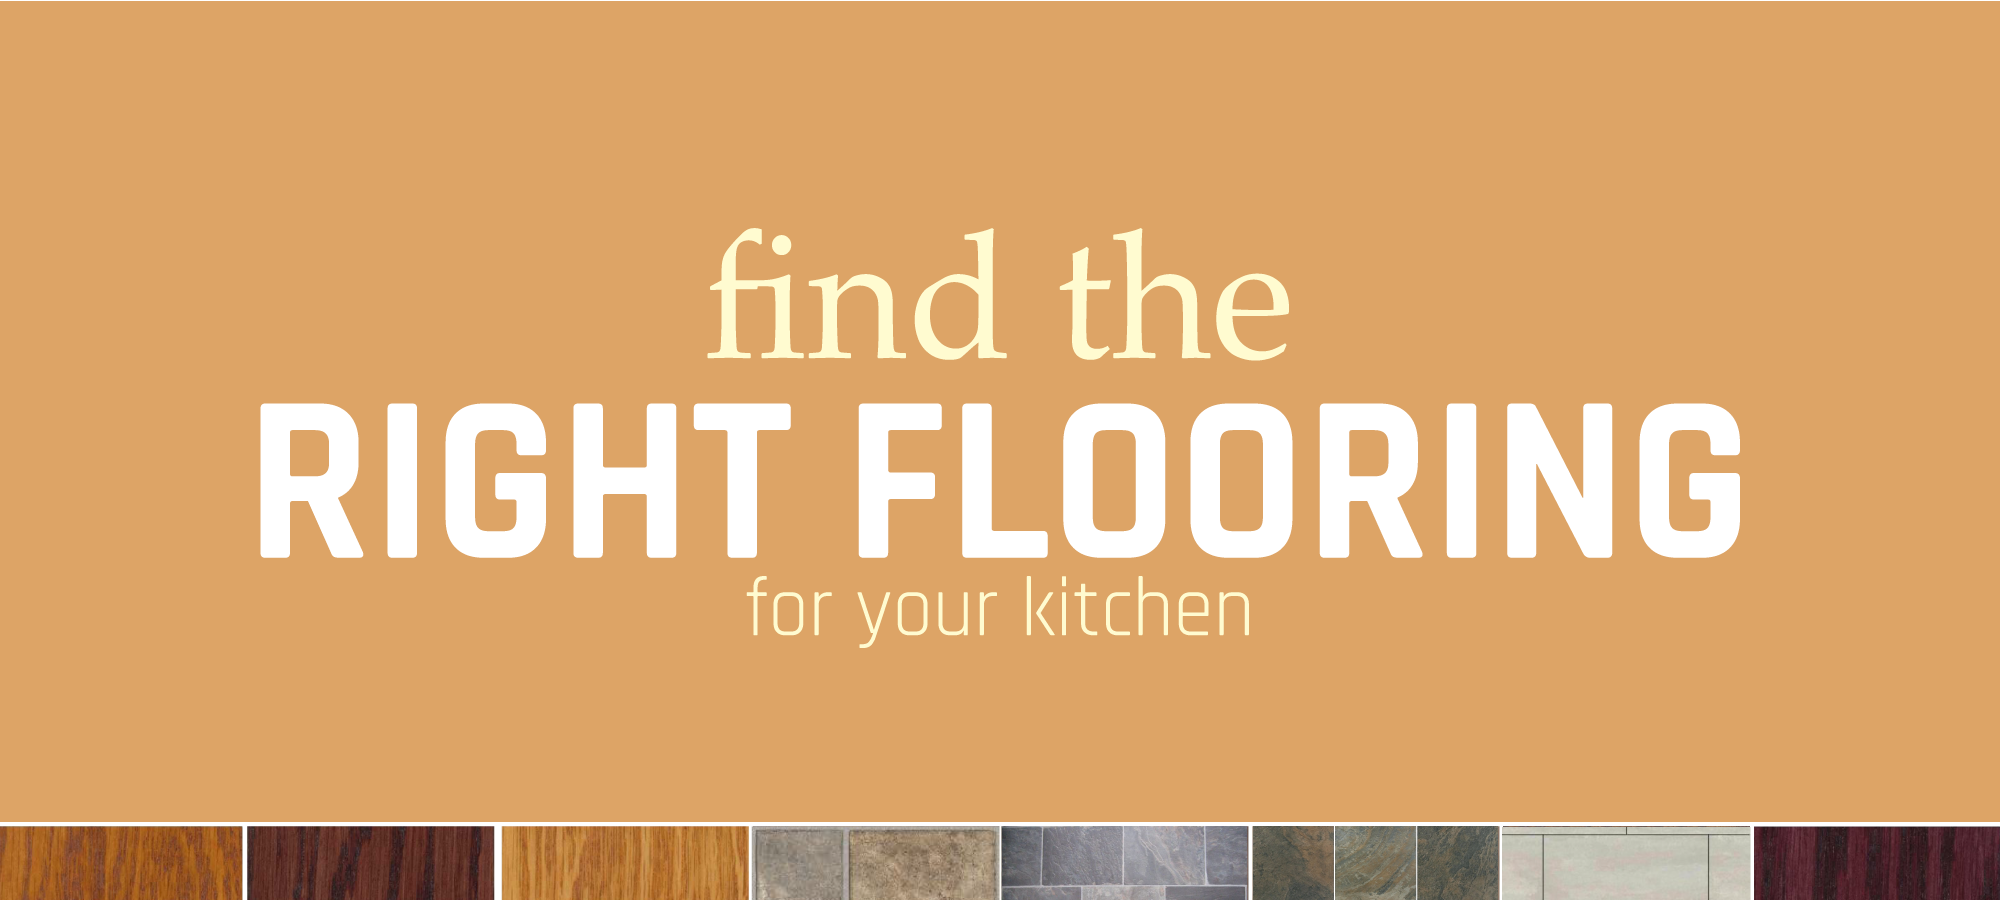 Personal Visigner-Find_the_Right_Kitchen_Flooring